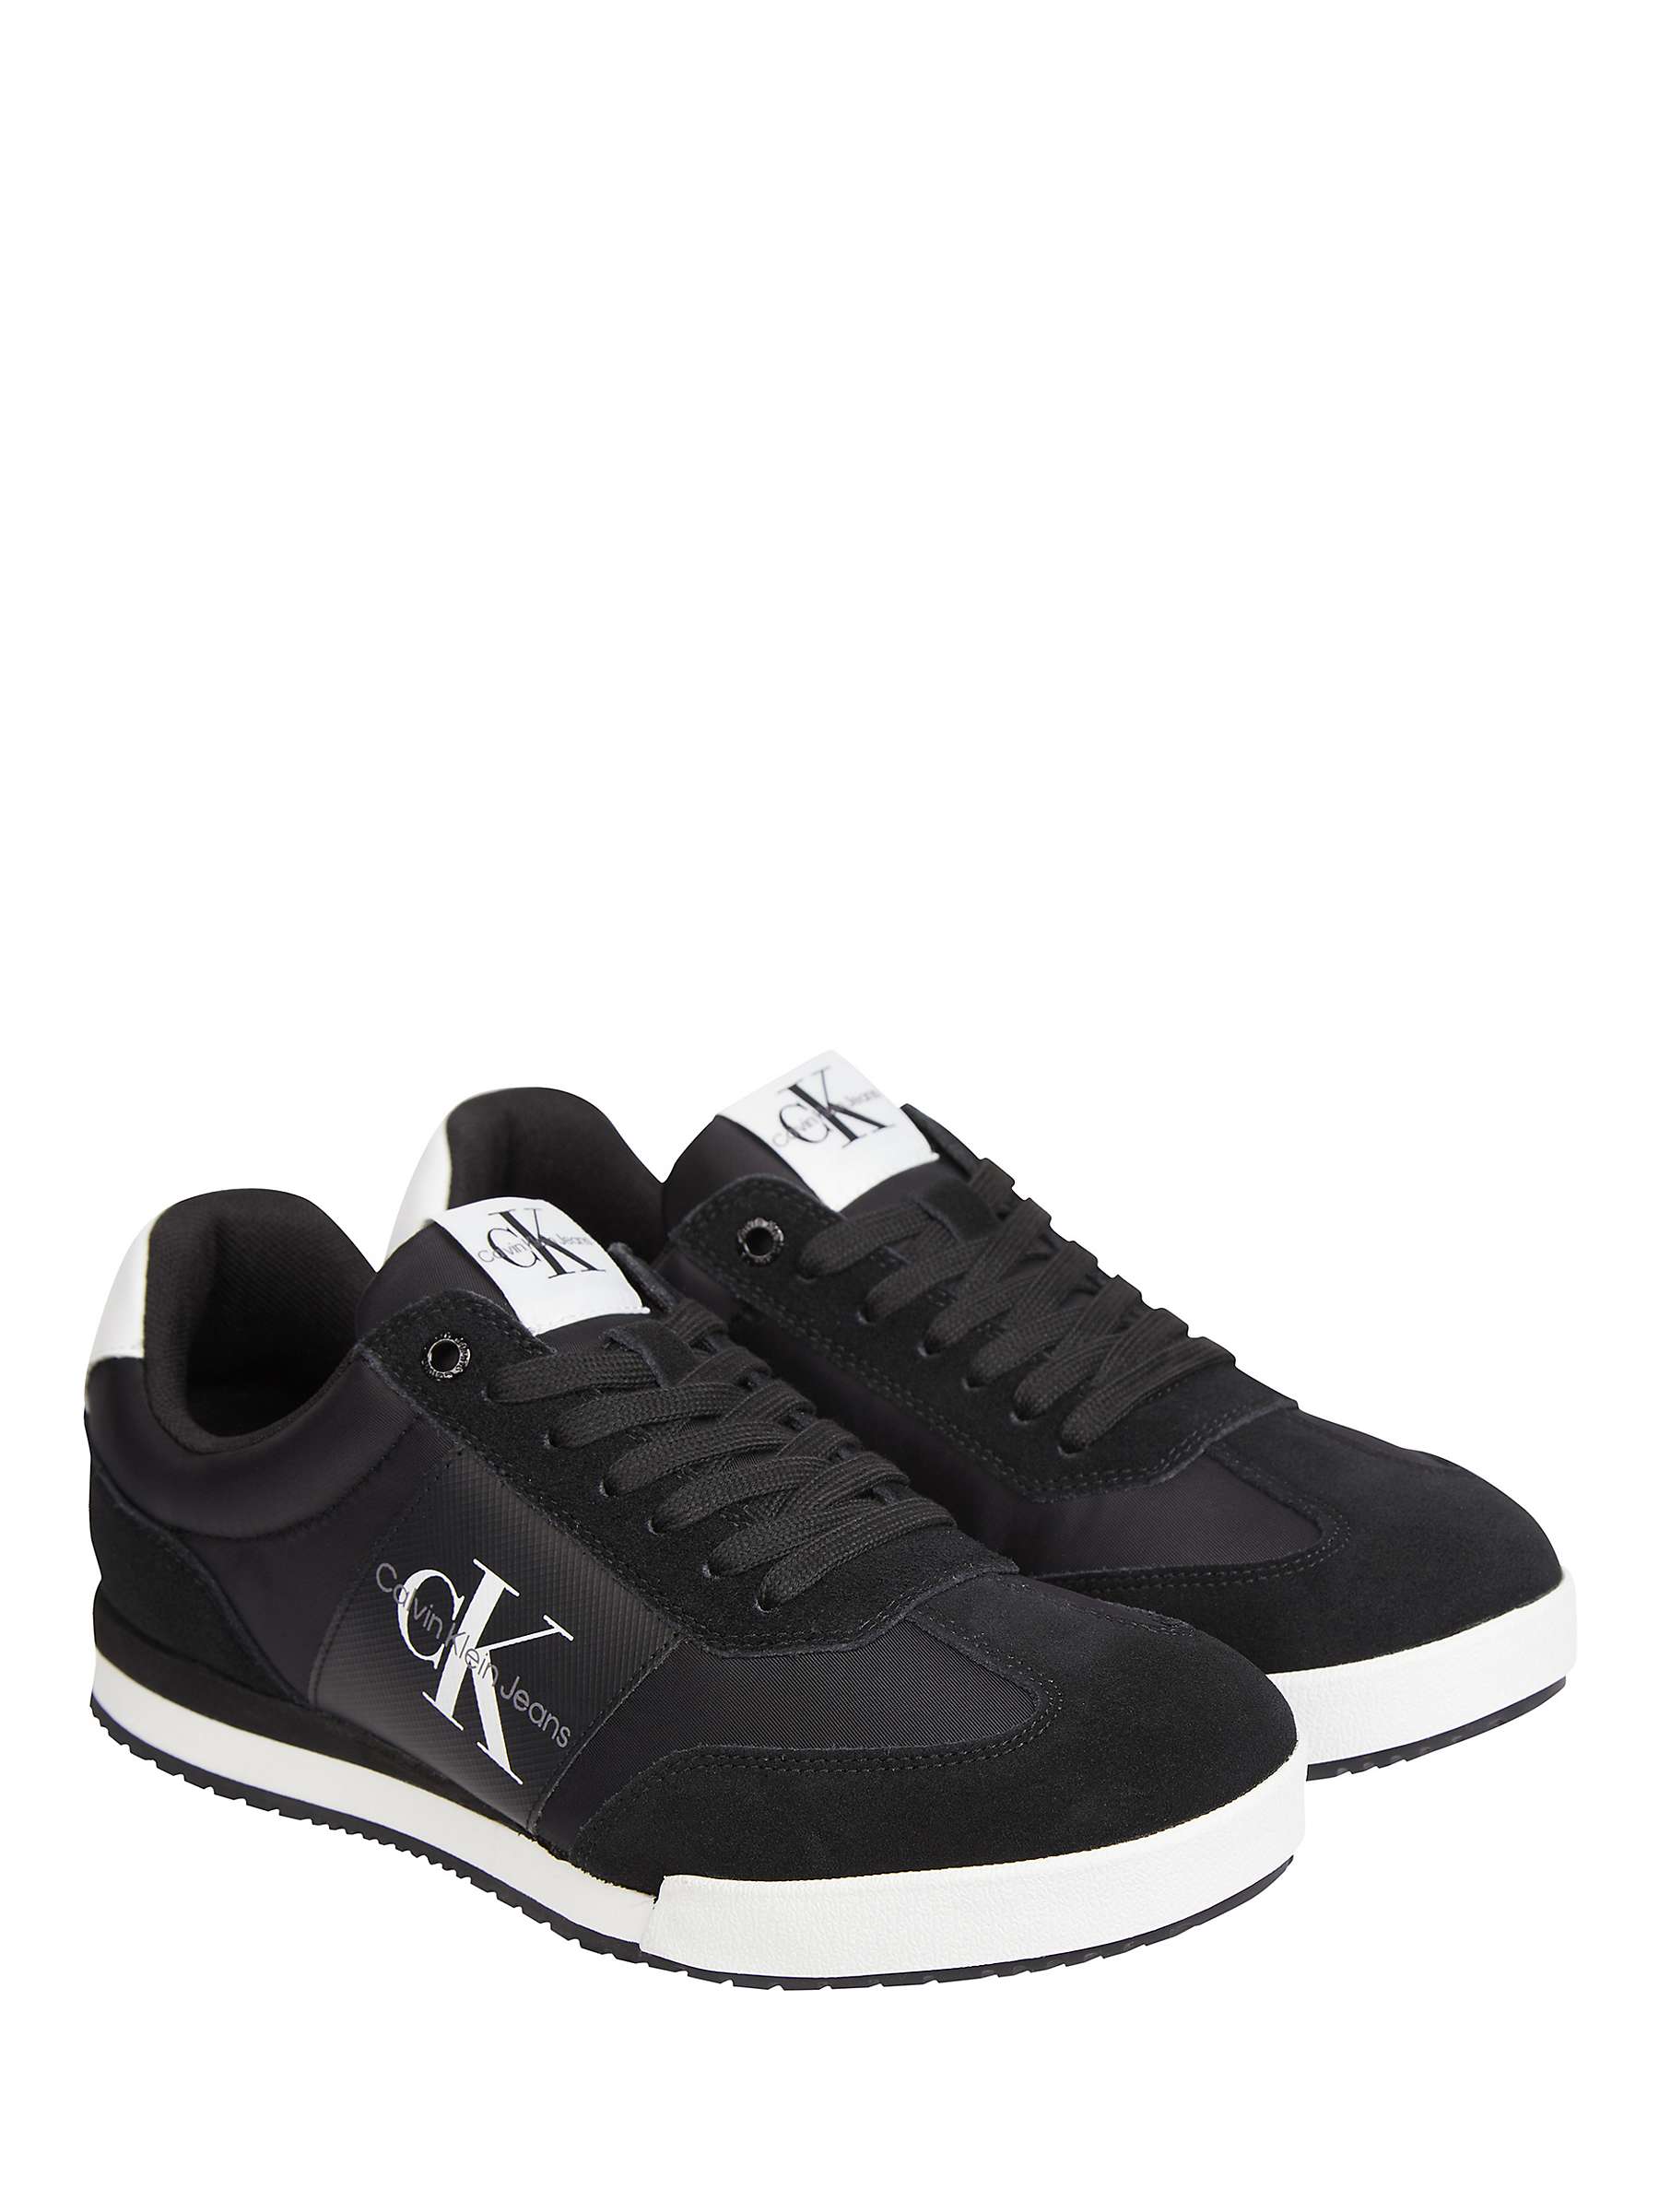 Buy Calvin Klein Jeans Mono Leather Lace-Up Trainers Online at johnlewis.com